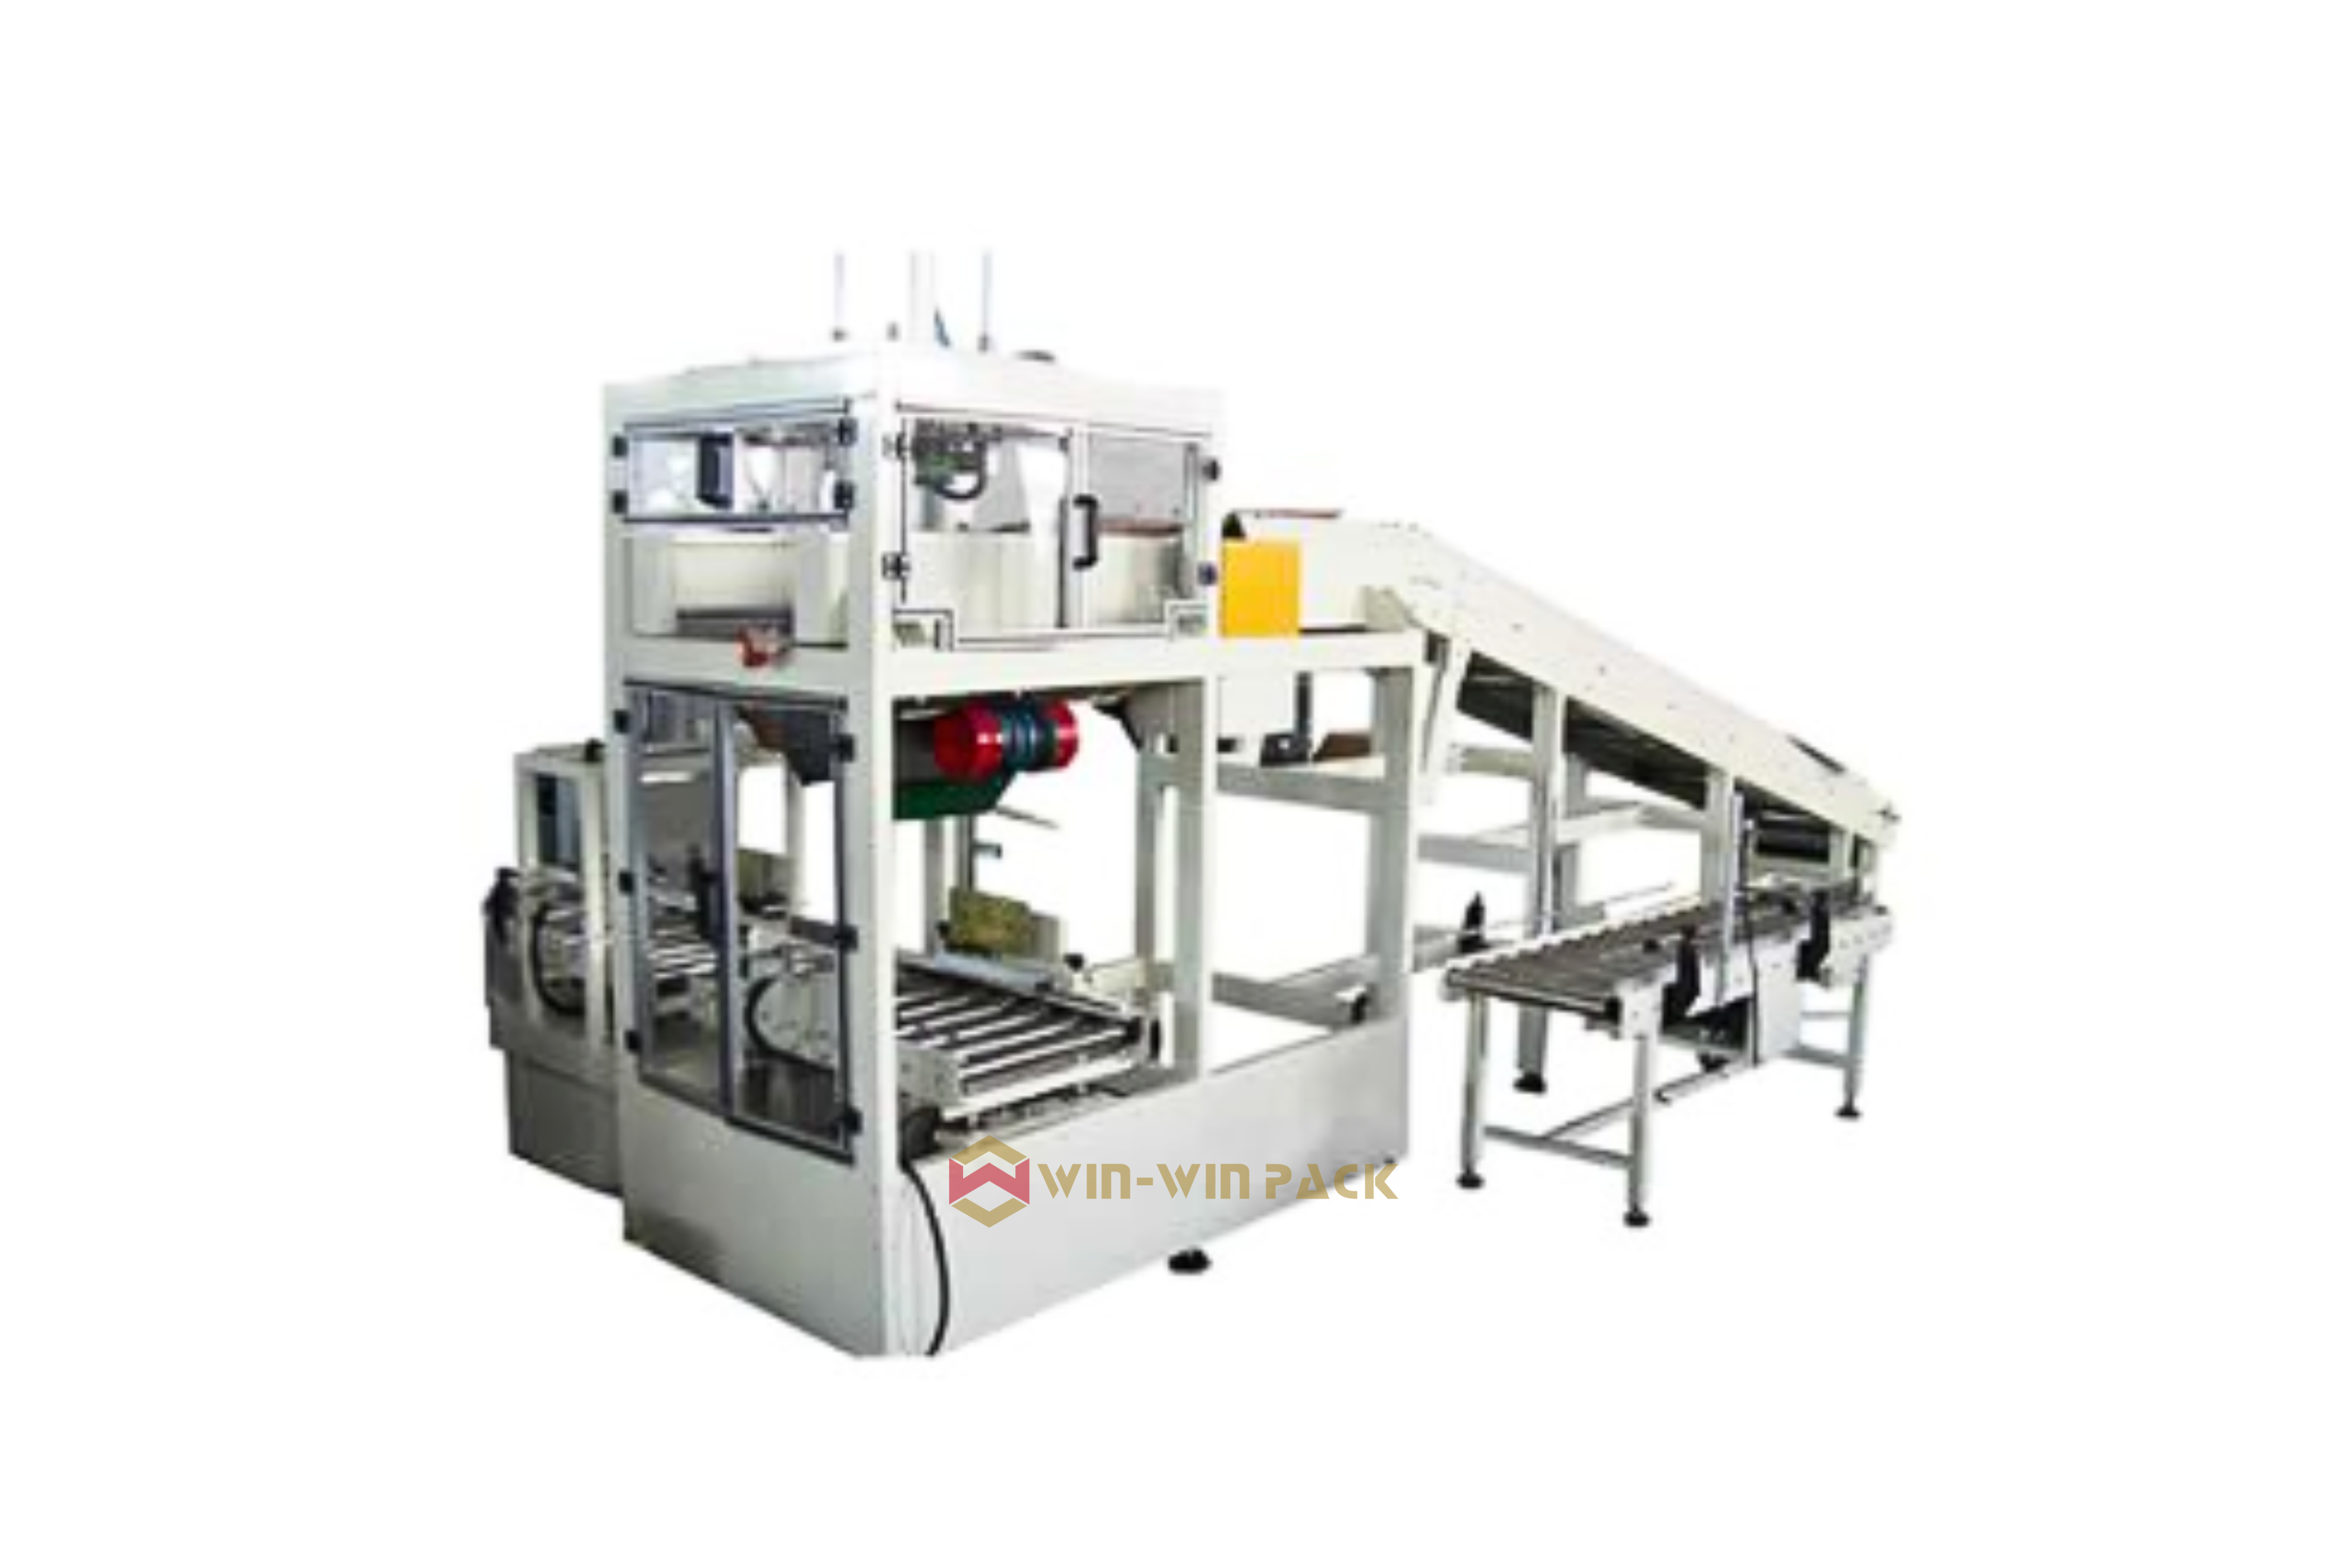 Automatic drop packer for pouches